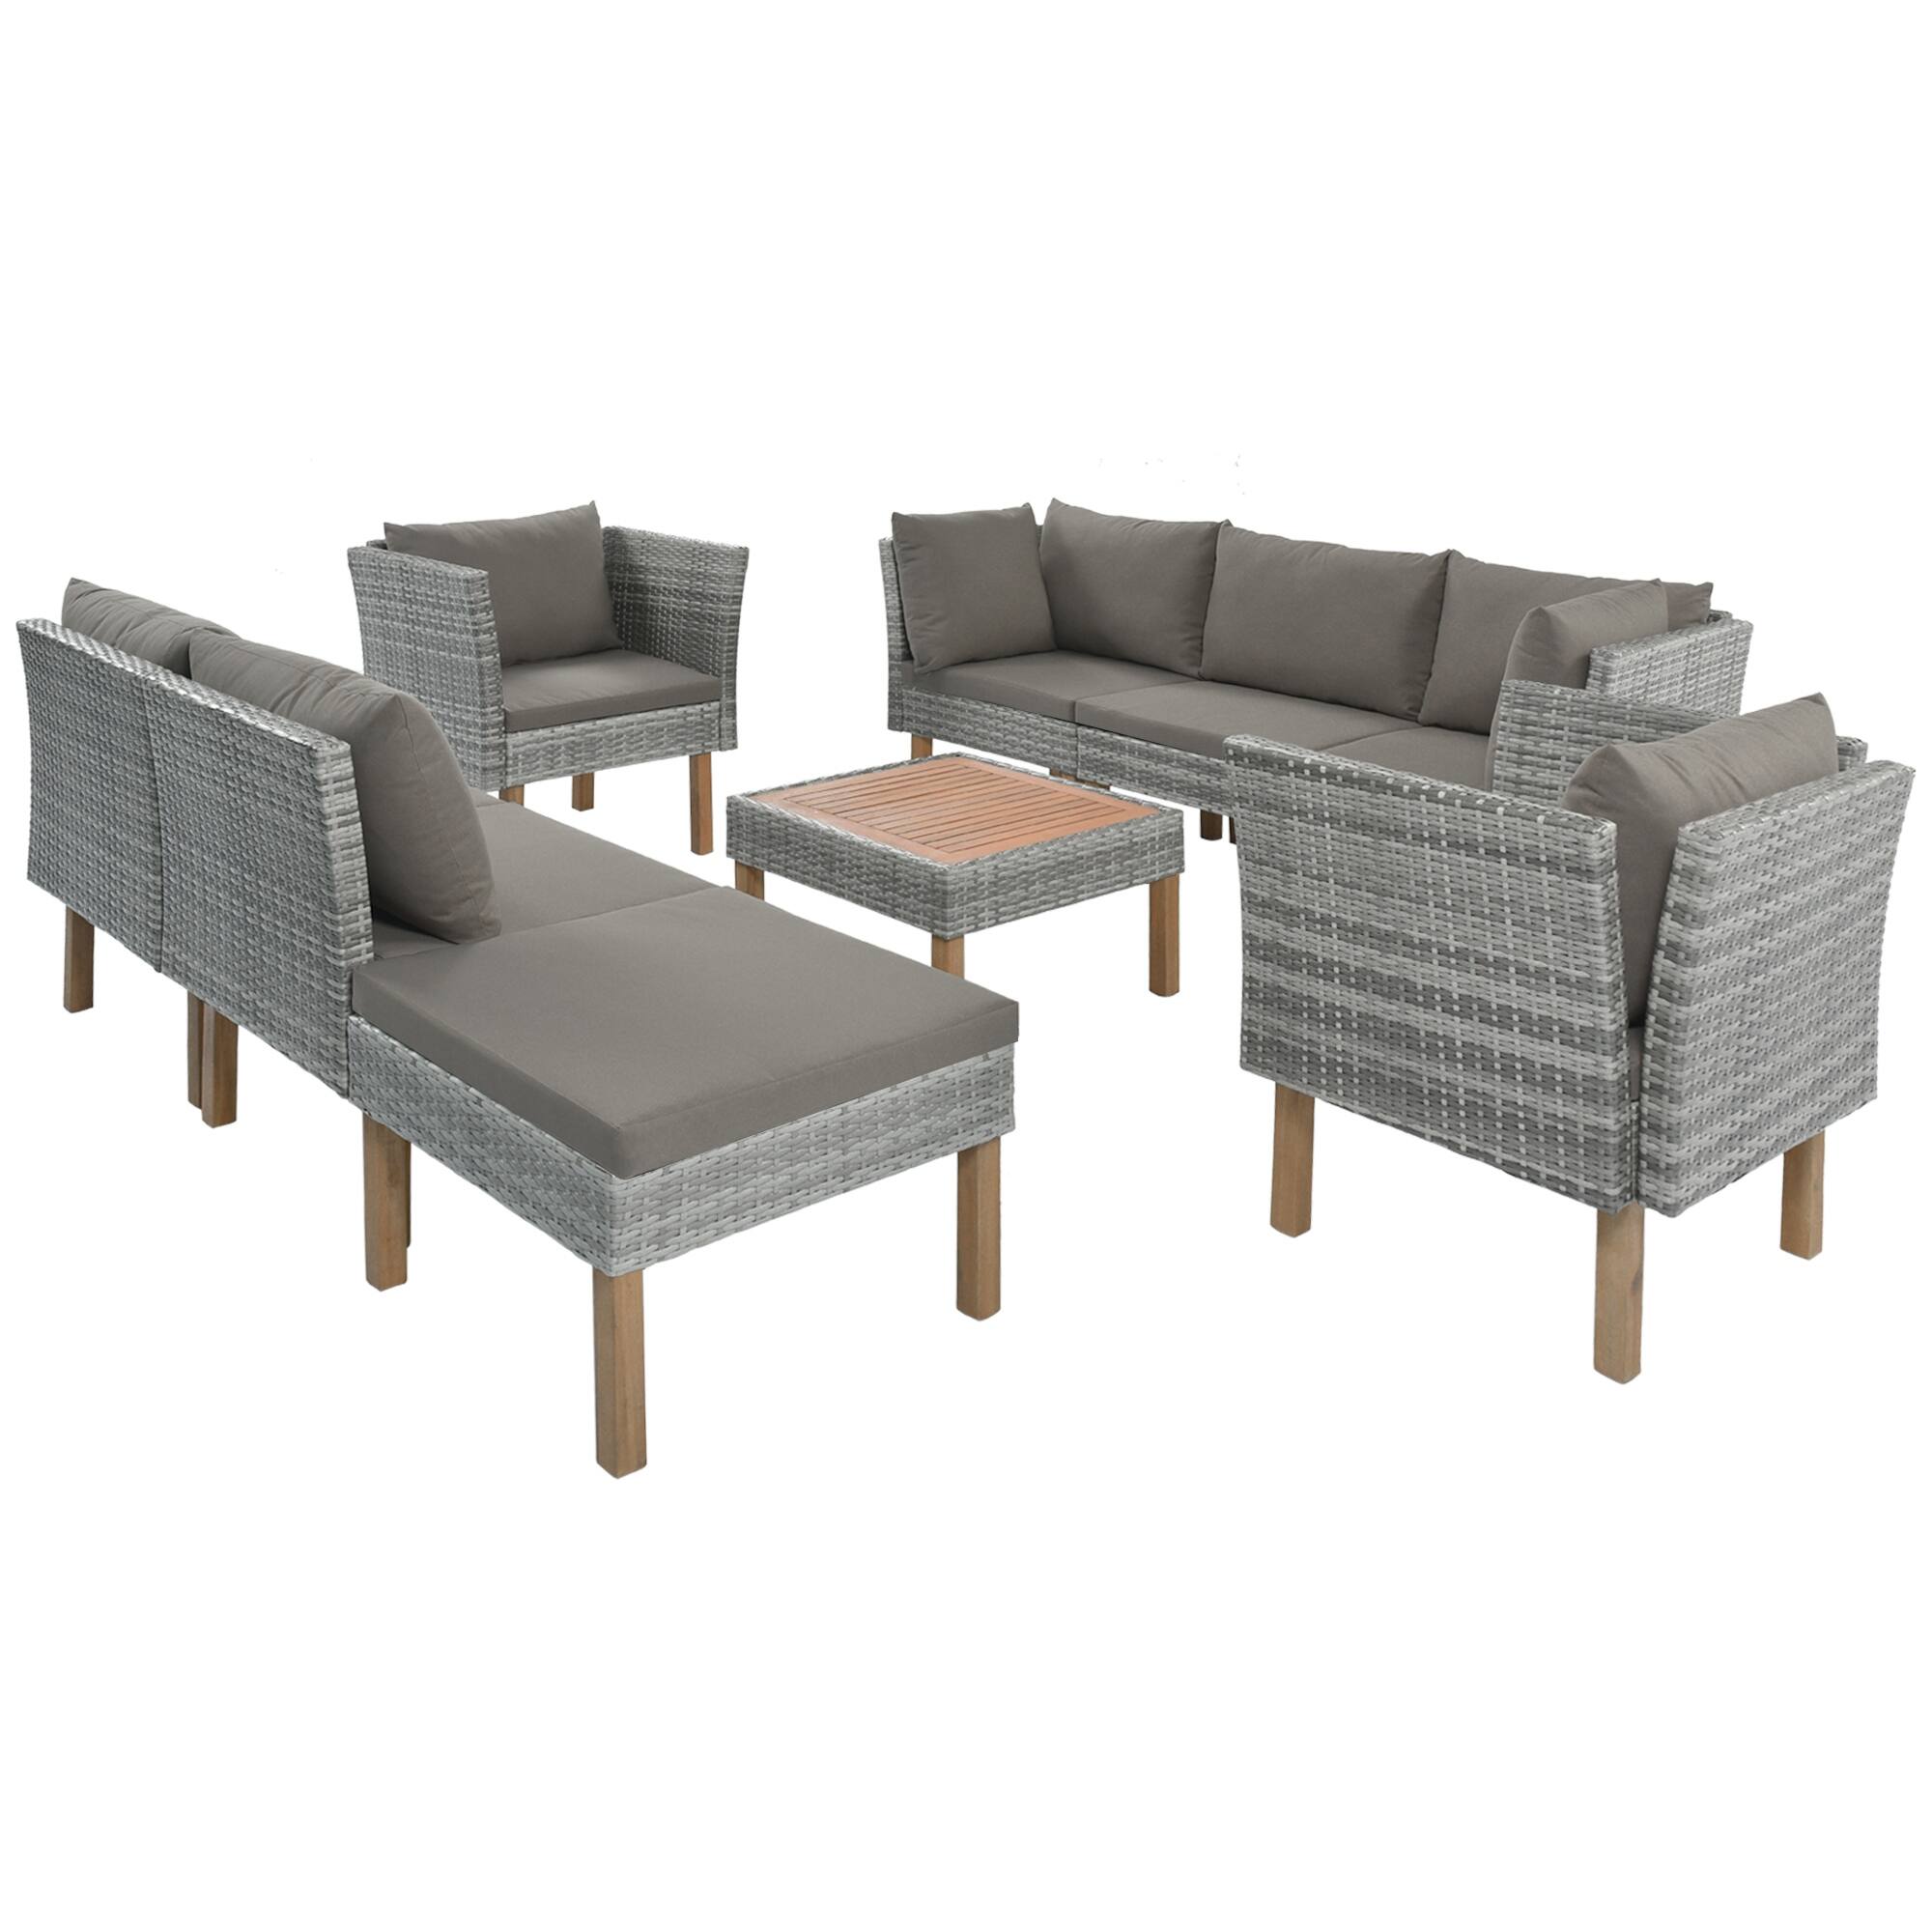 Gray Outdoor Patio Furniture All-Weather Wicker Sofa Set with Acacia Wood Table Top and Removable Cushions, PE Rattan